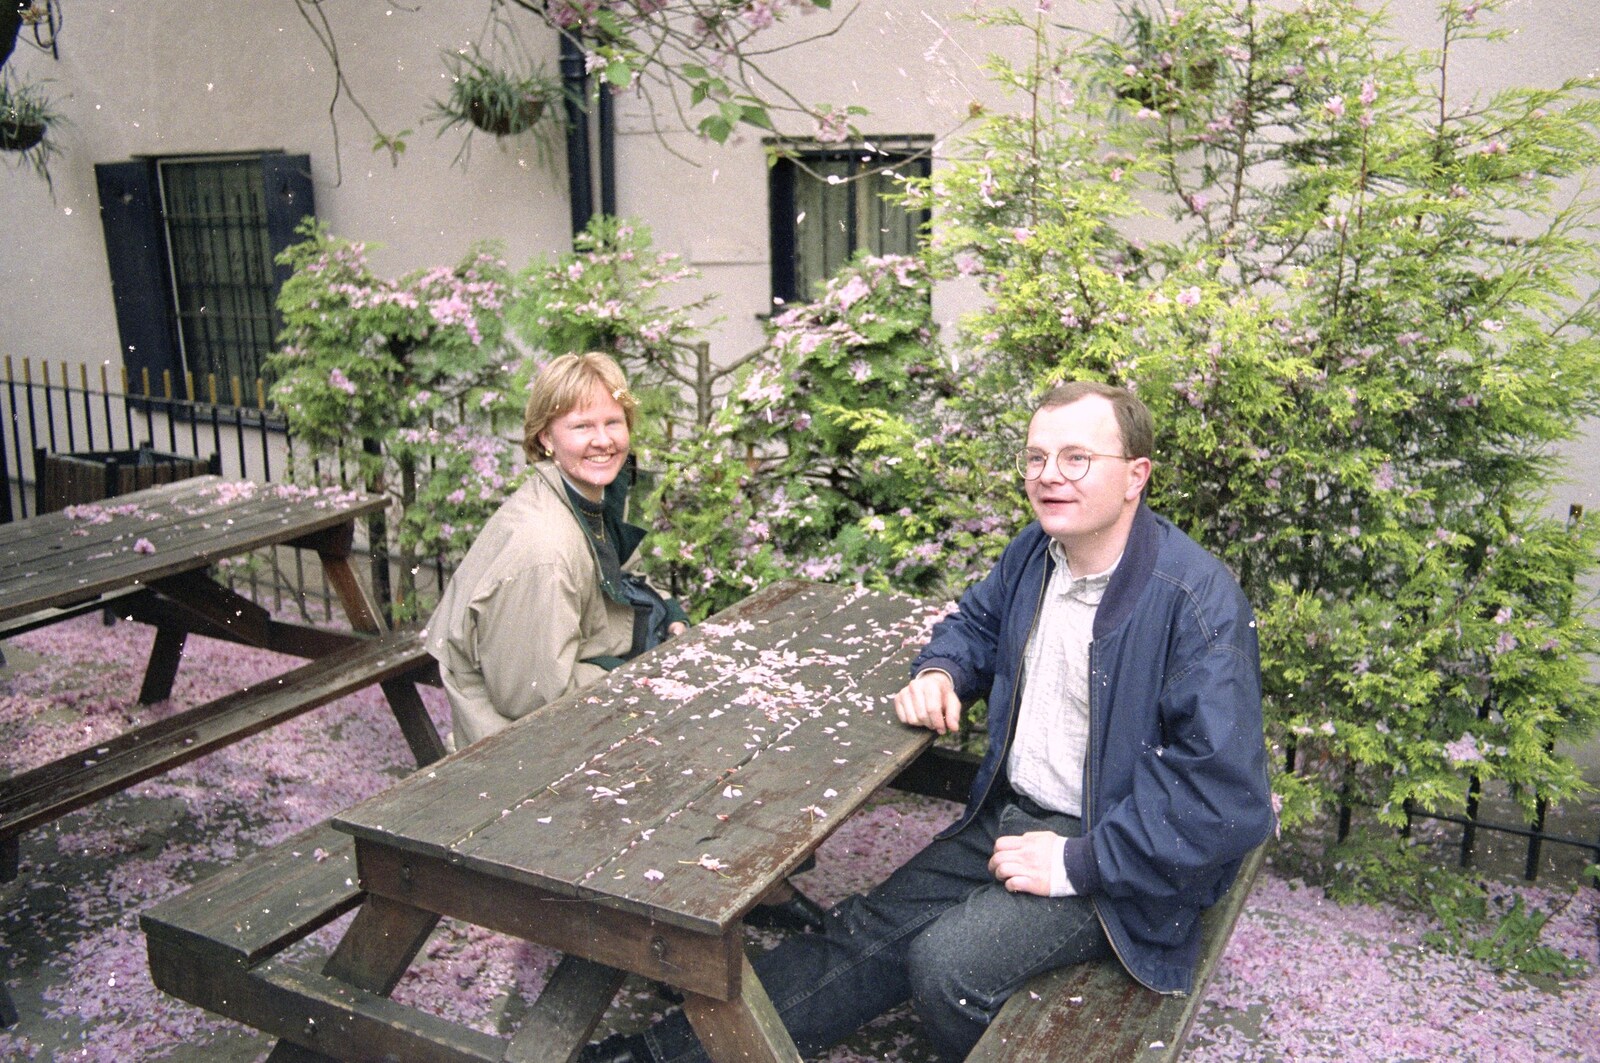 Hamish's Oxford Party, Oxfordshire - 25th April 1992: In a pub garden, under a cover of blossom